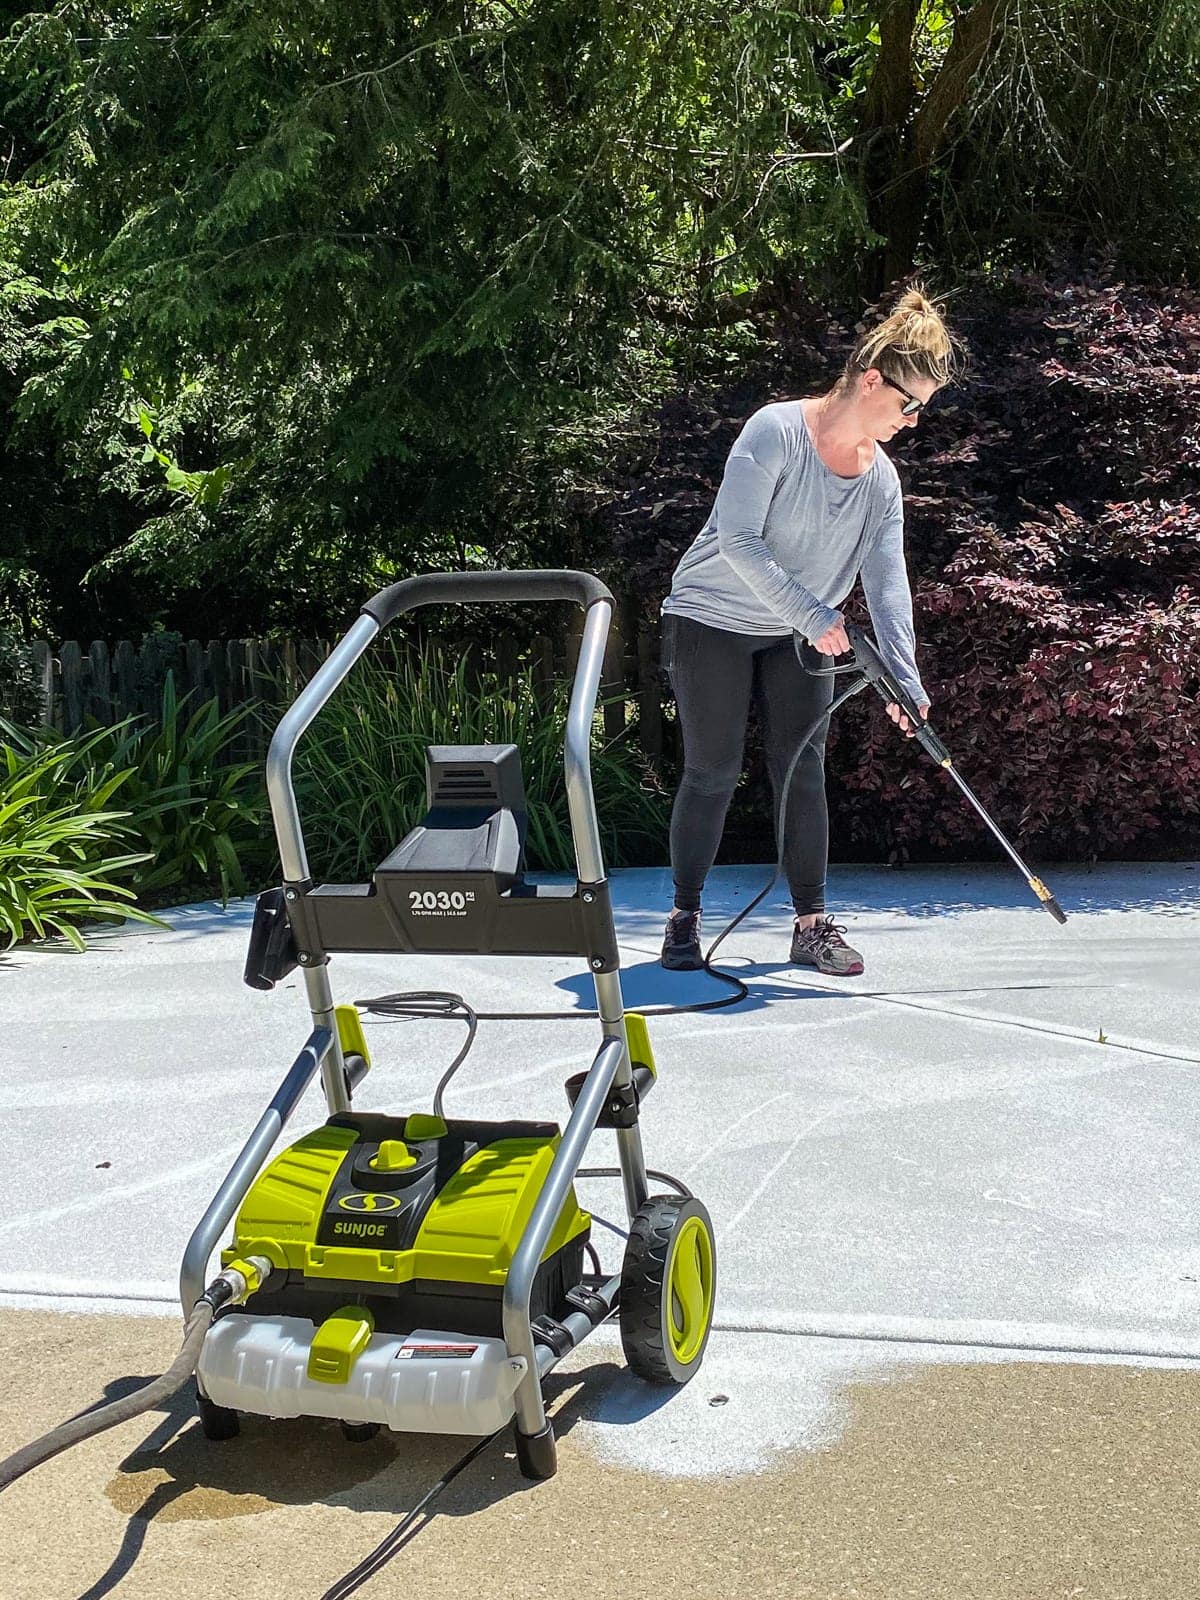 power washing concrete before painting around a pool